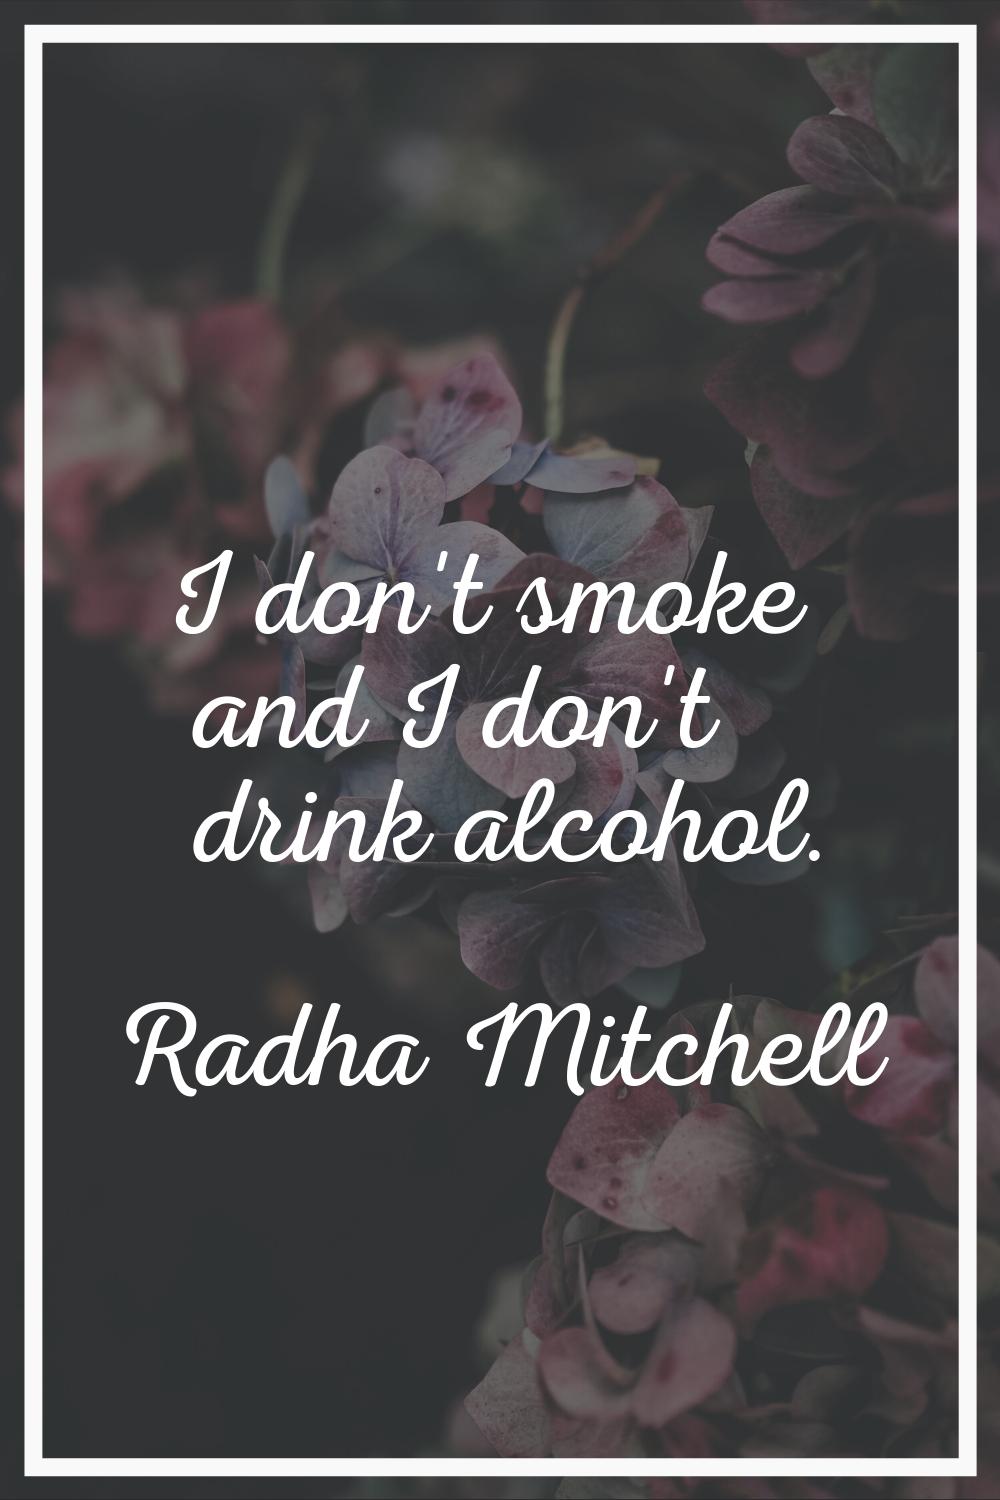 I don't smoke and I don't drink alcohol.